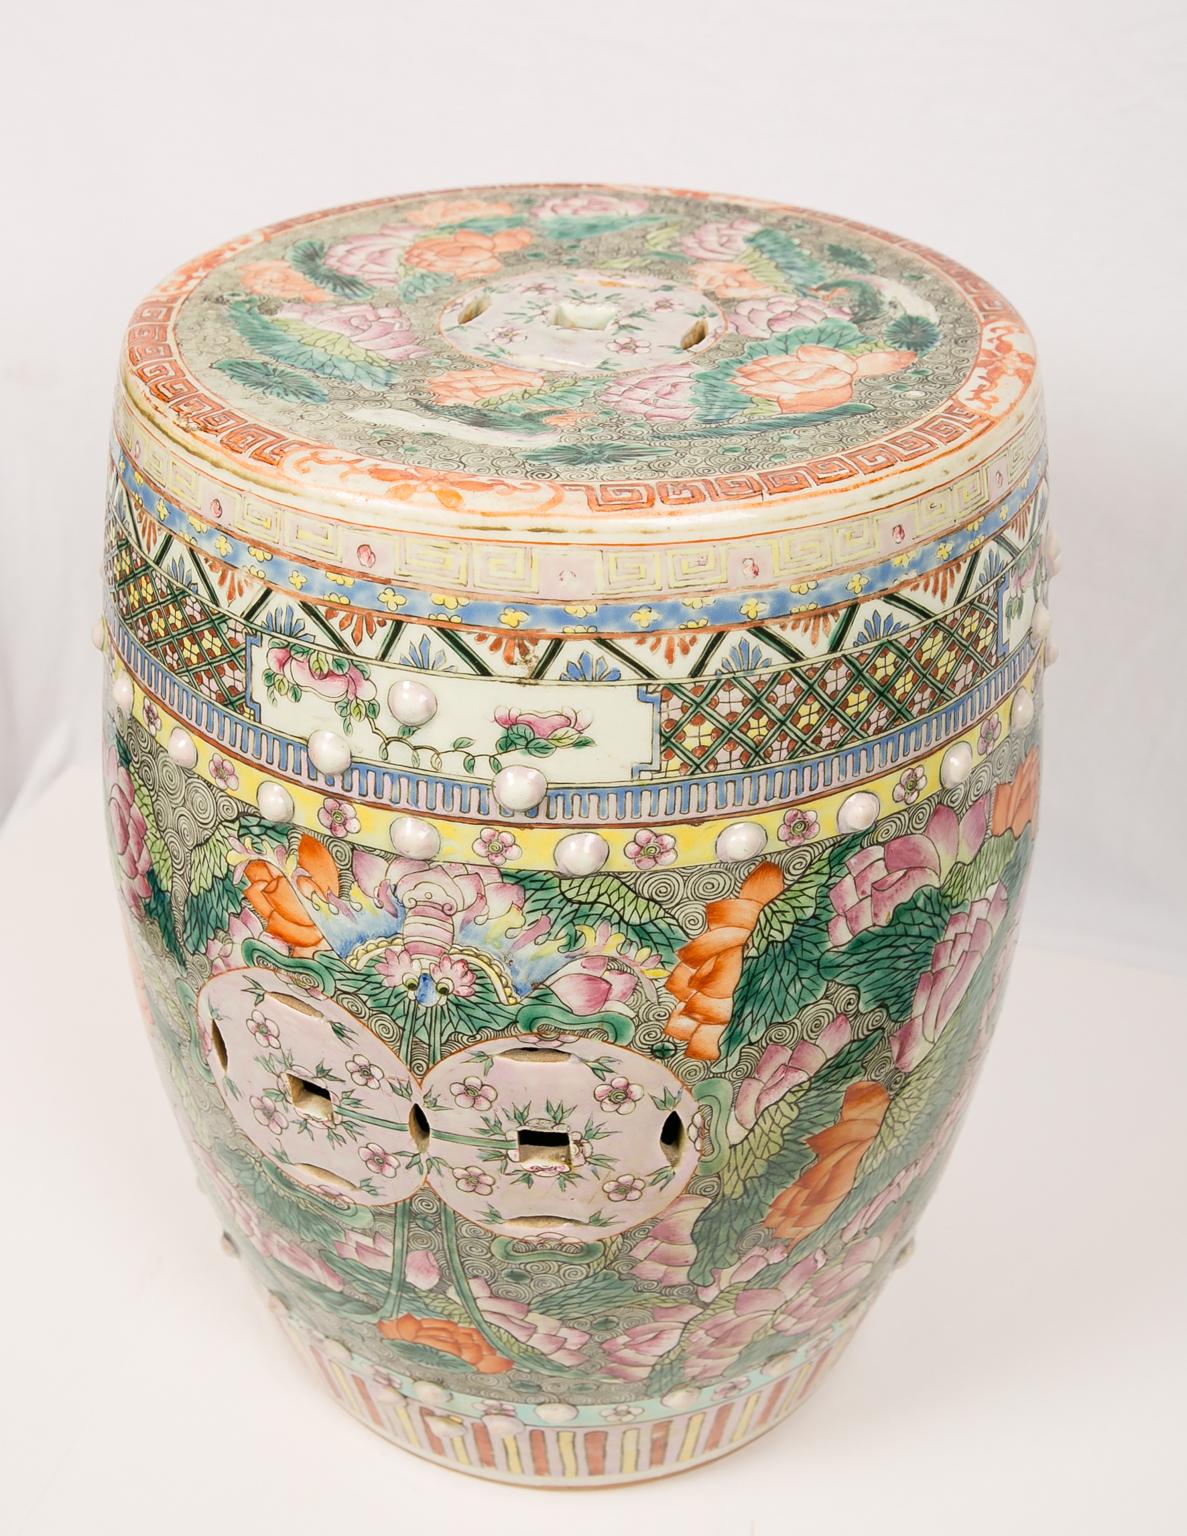 Stoneware Antique Chinese Garden Seat Hand-Painted with Lotus Flowers Early 20th Century